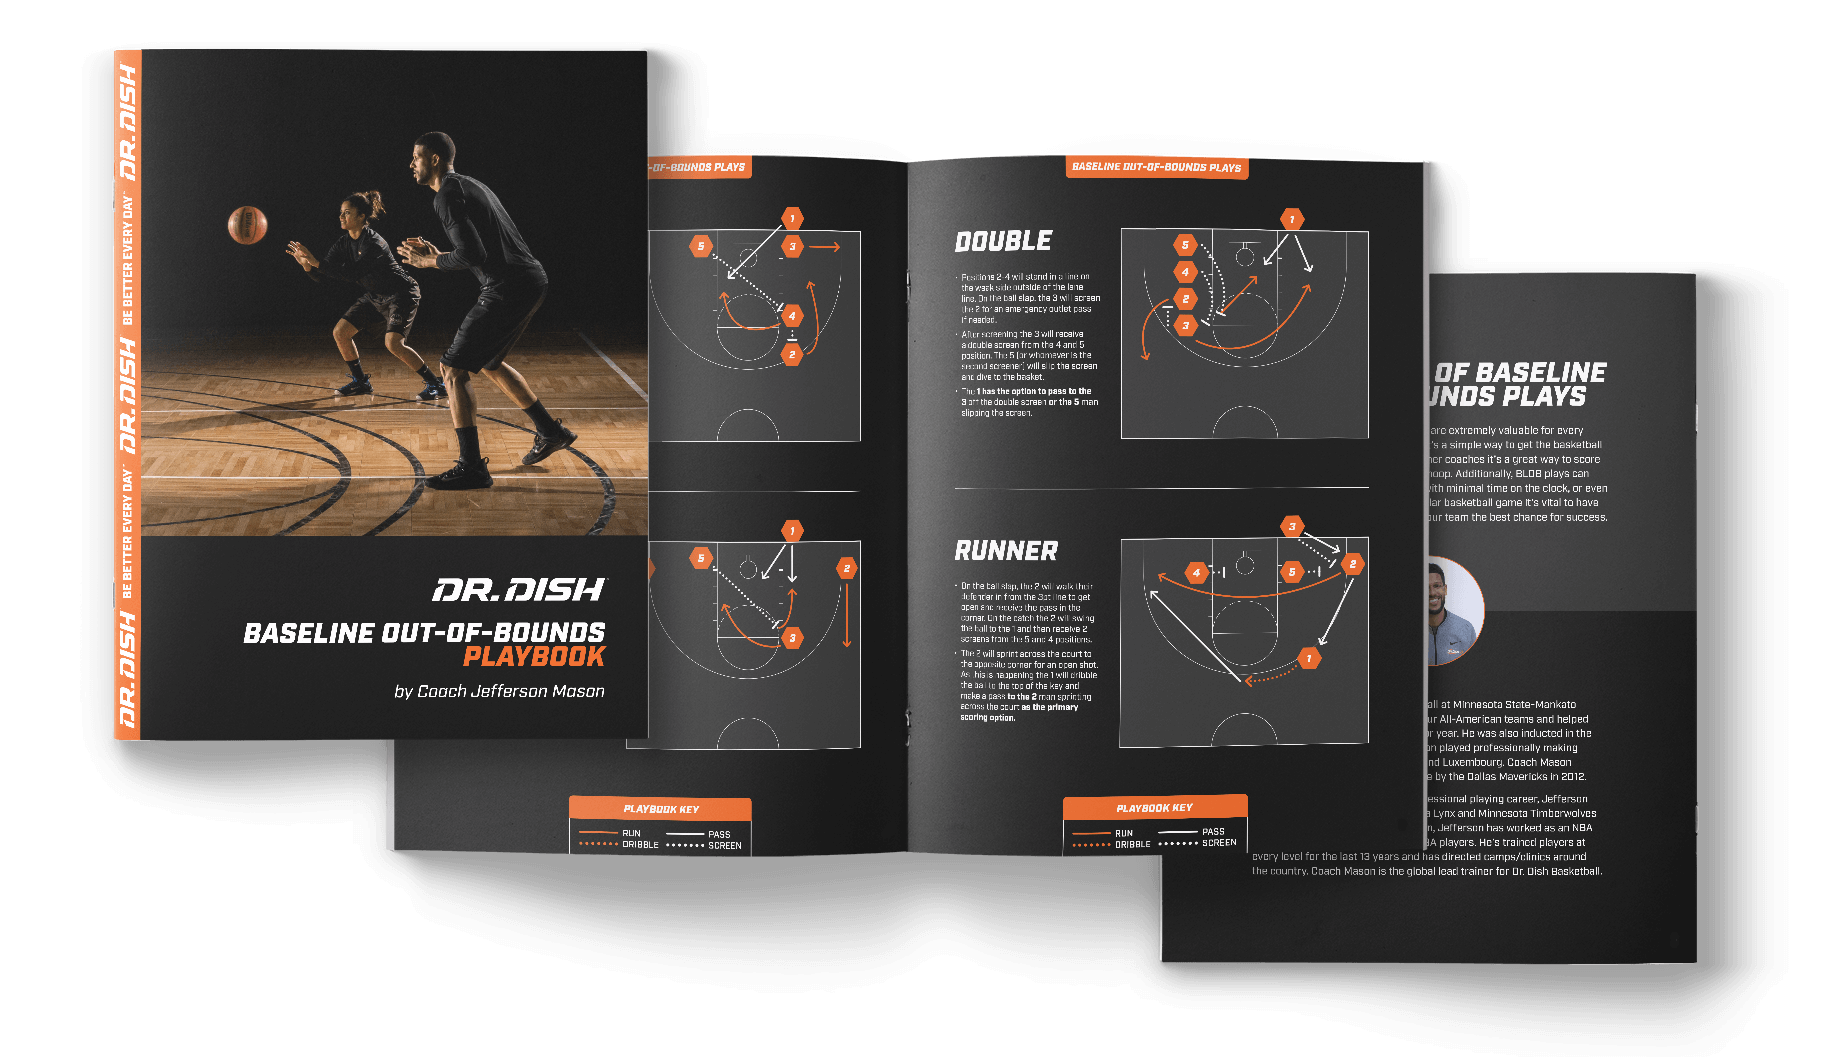 Baseline Out-of-Bounds Playbook